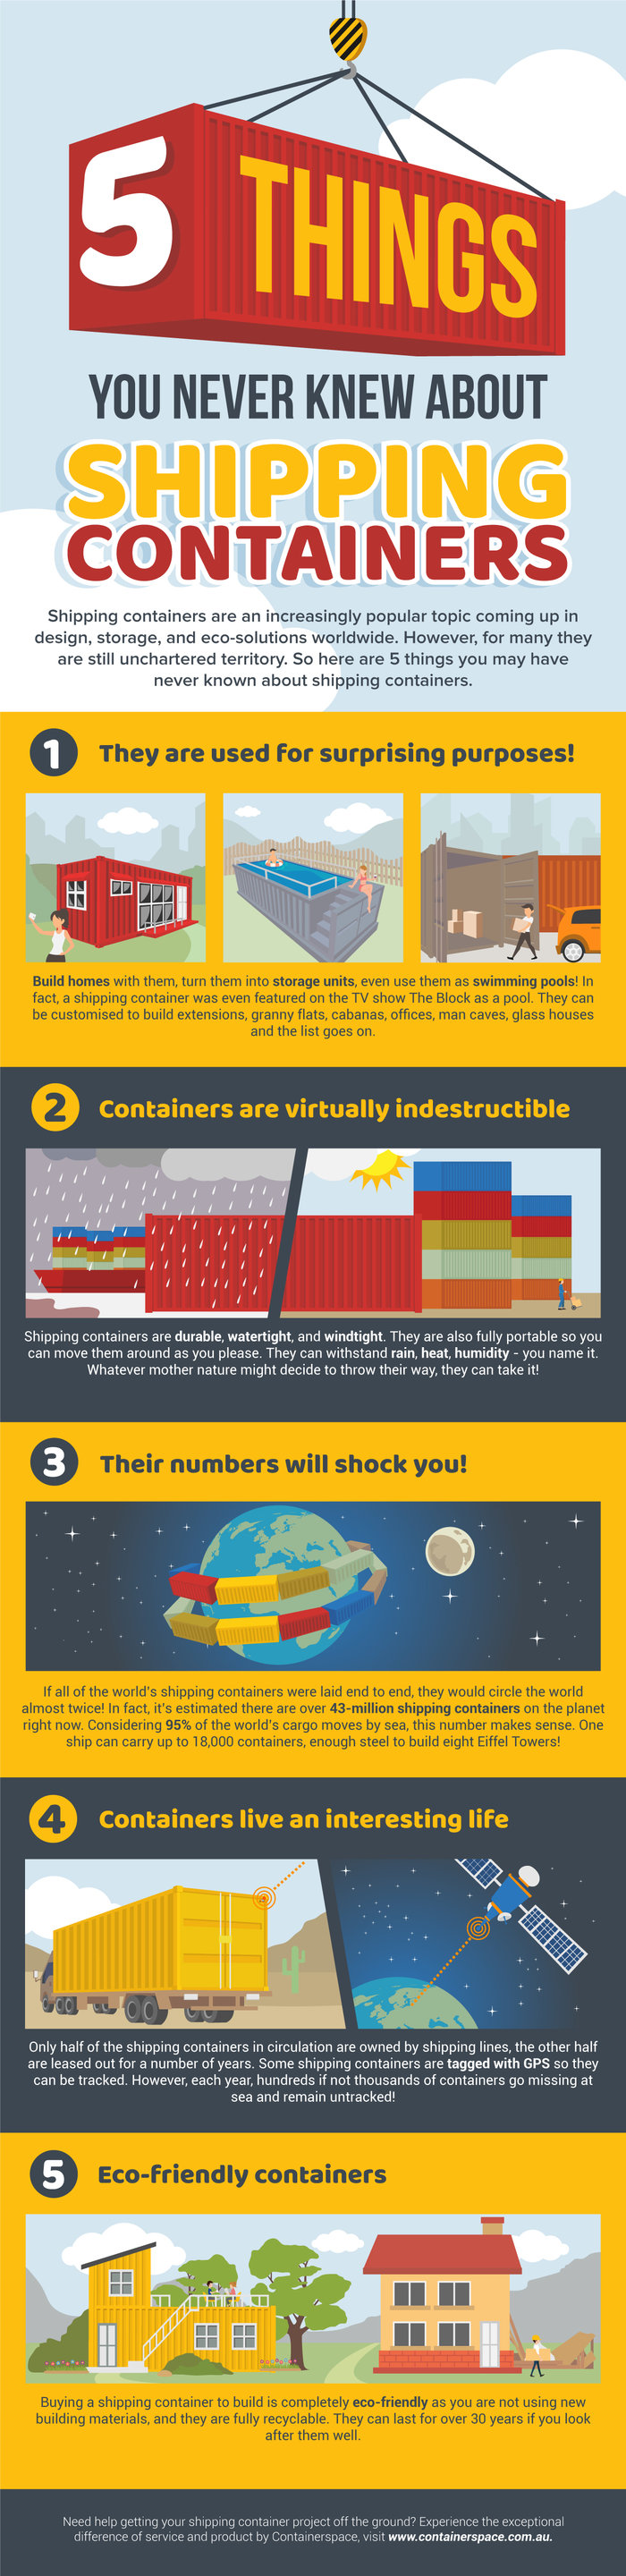 Shipping Container Facts Infographic